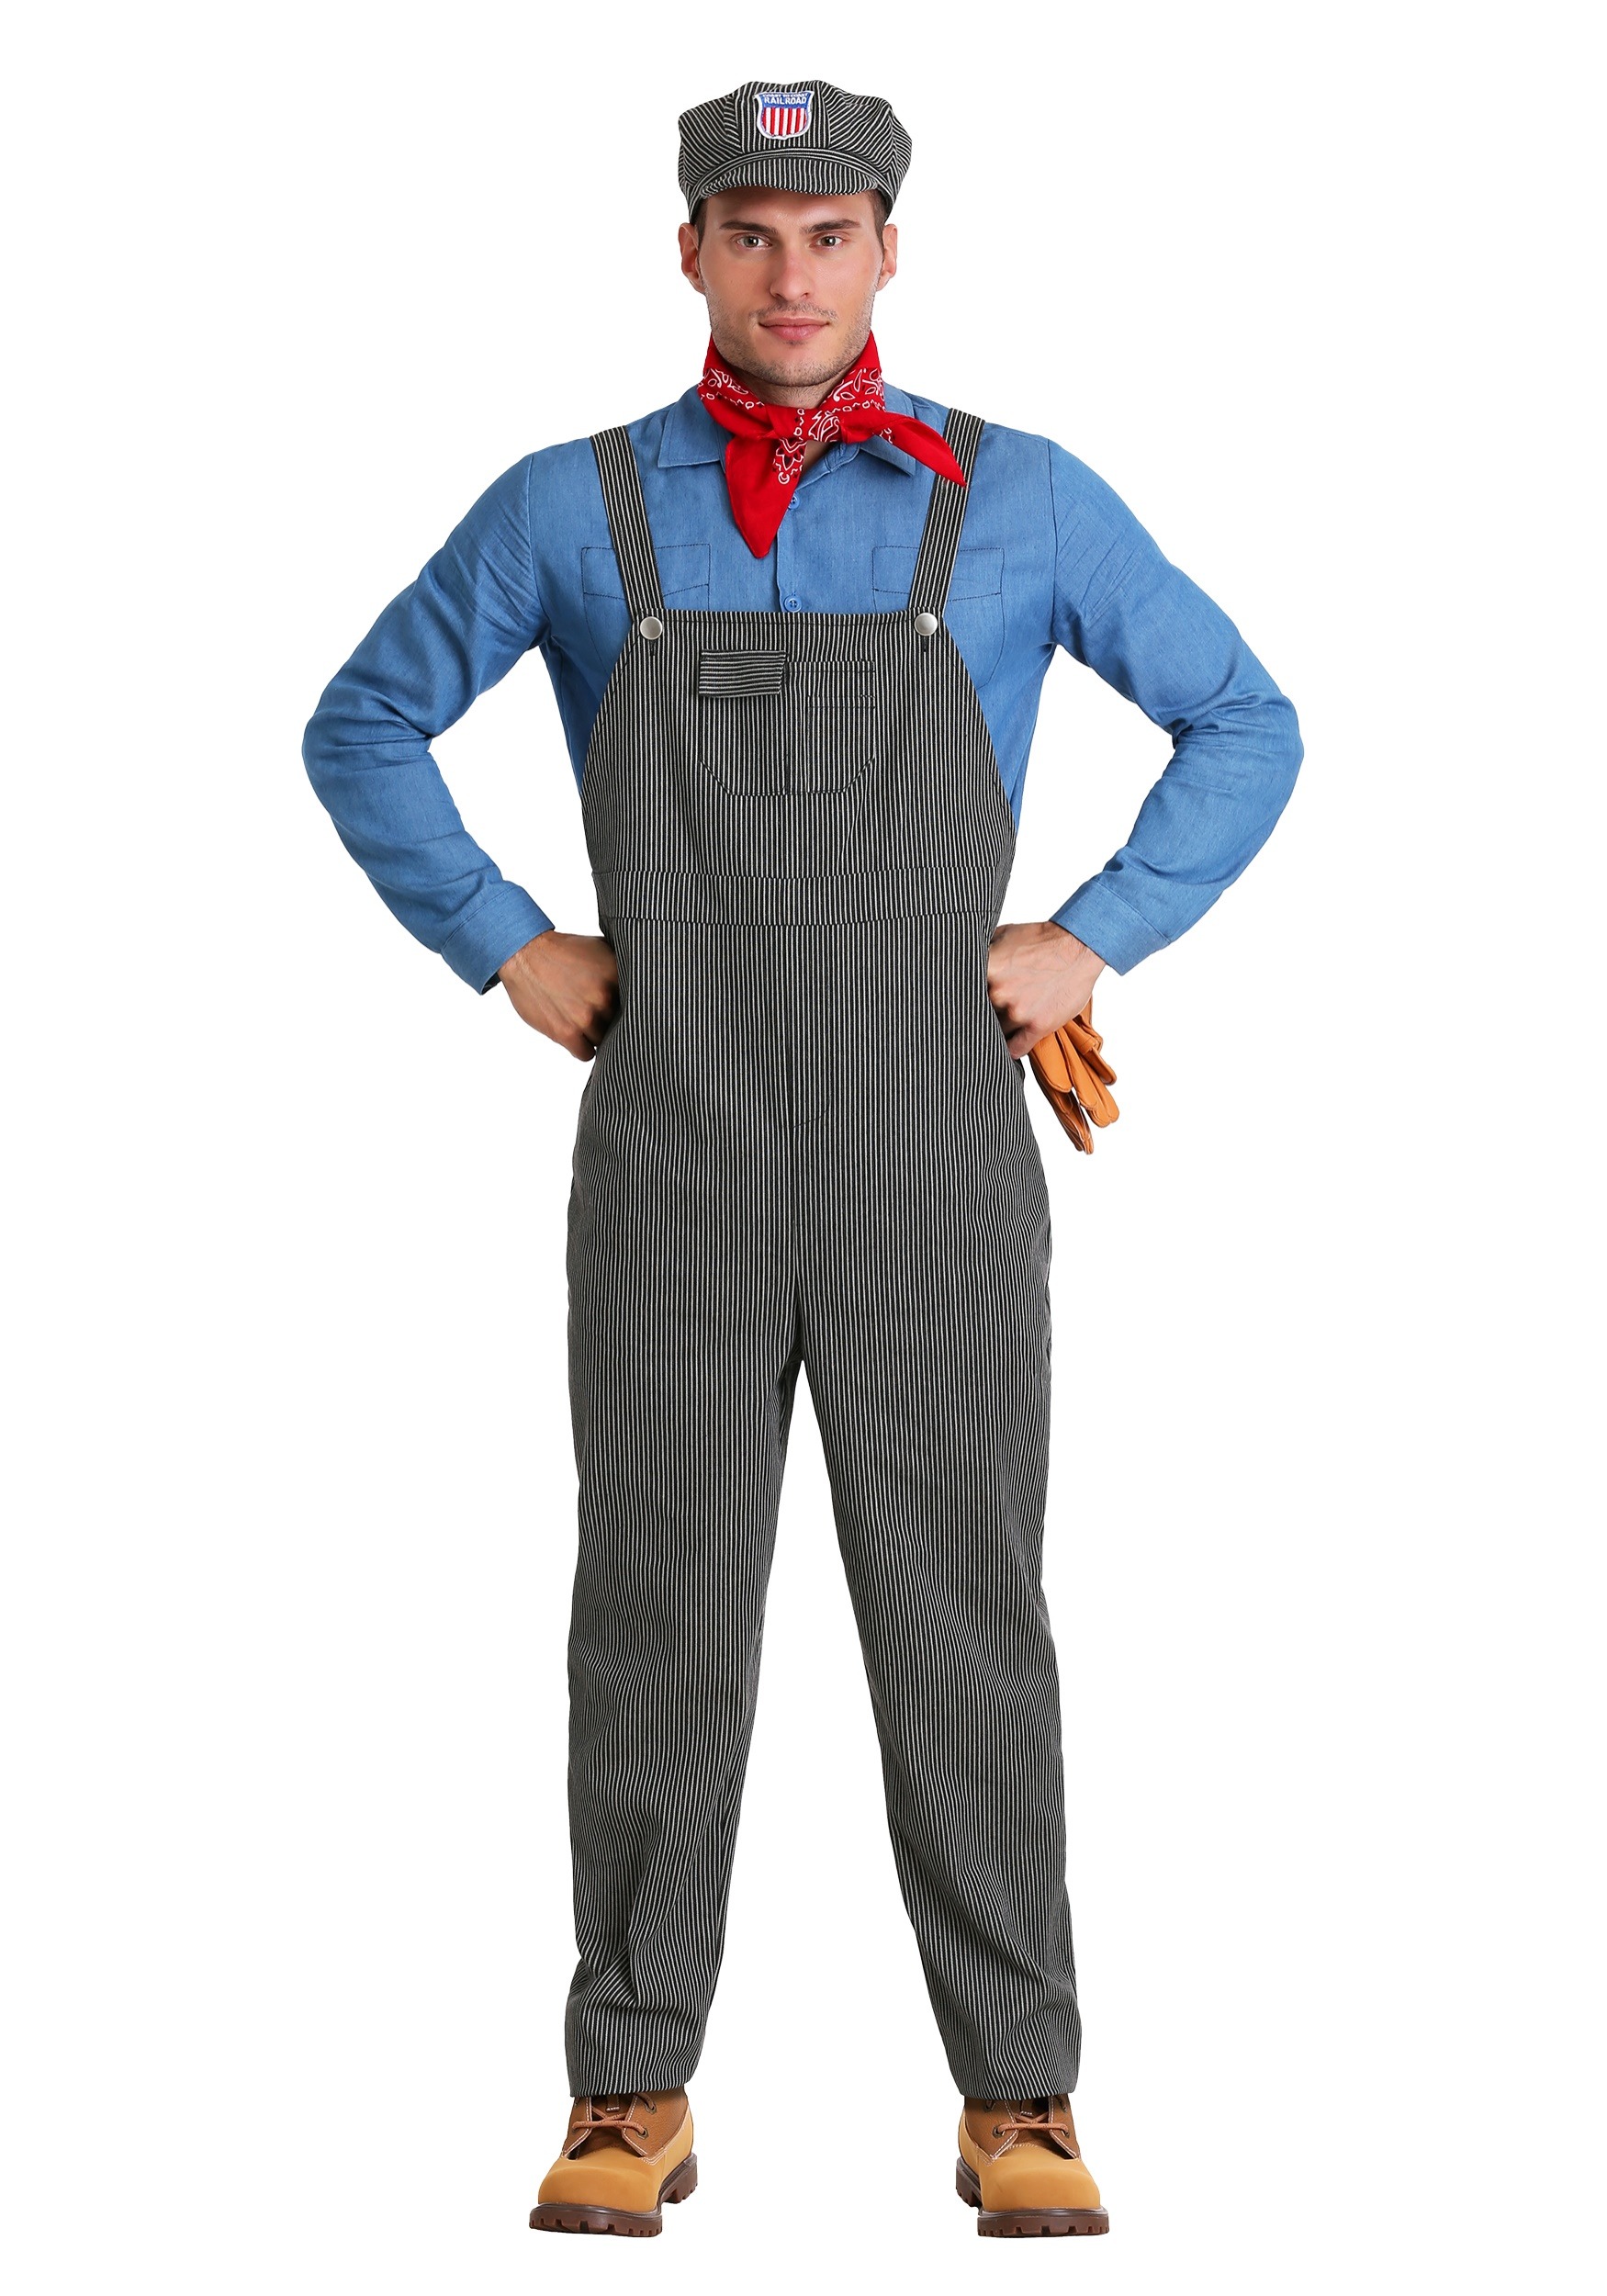 Train Engineer Fancy Dress Costume For Adults